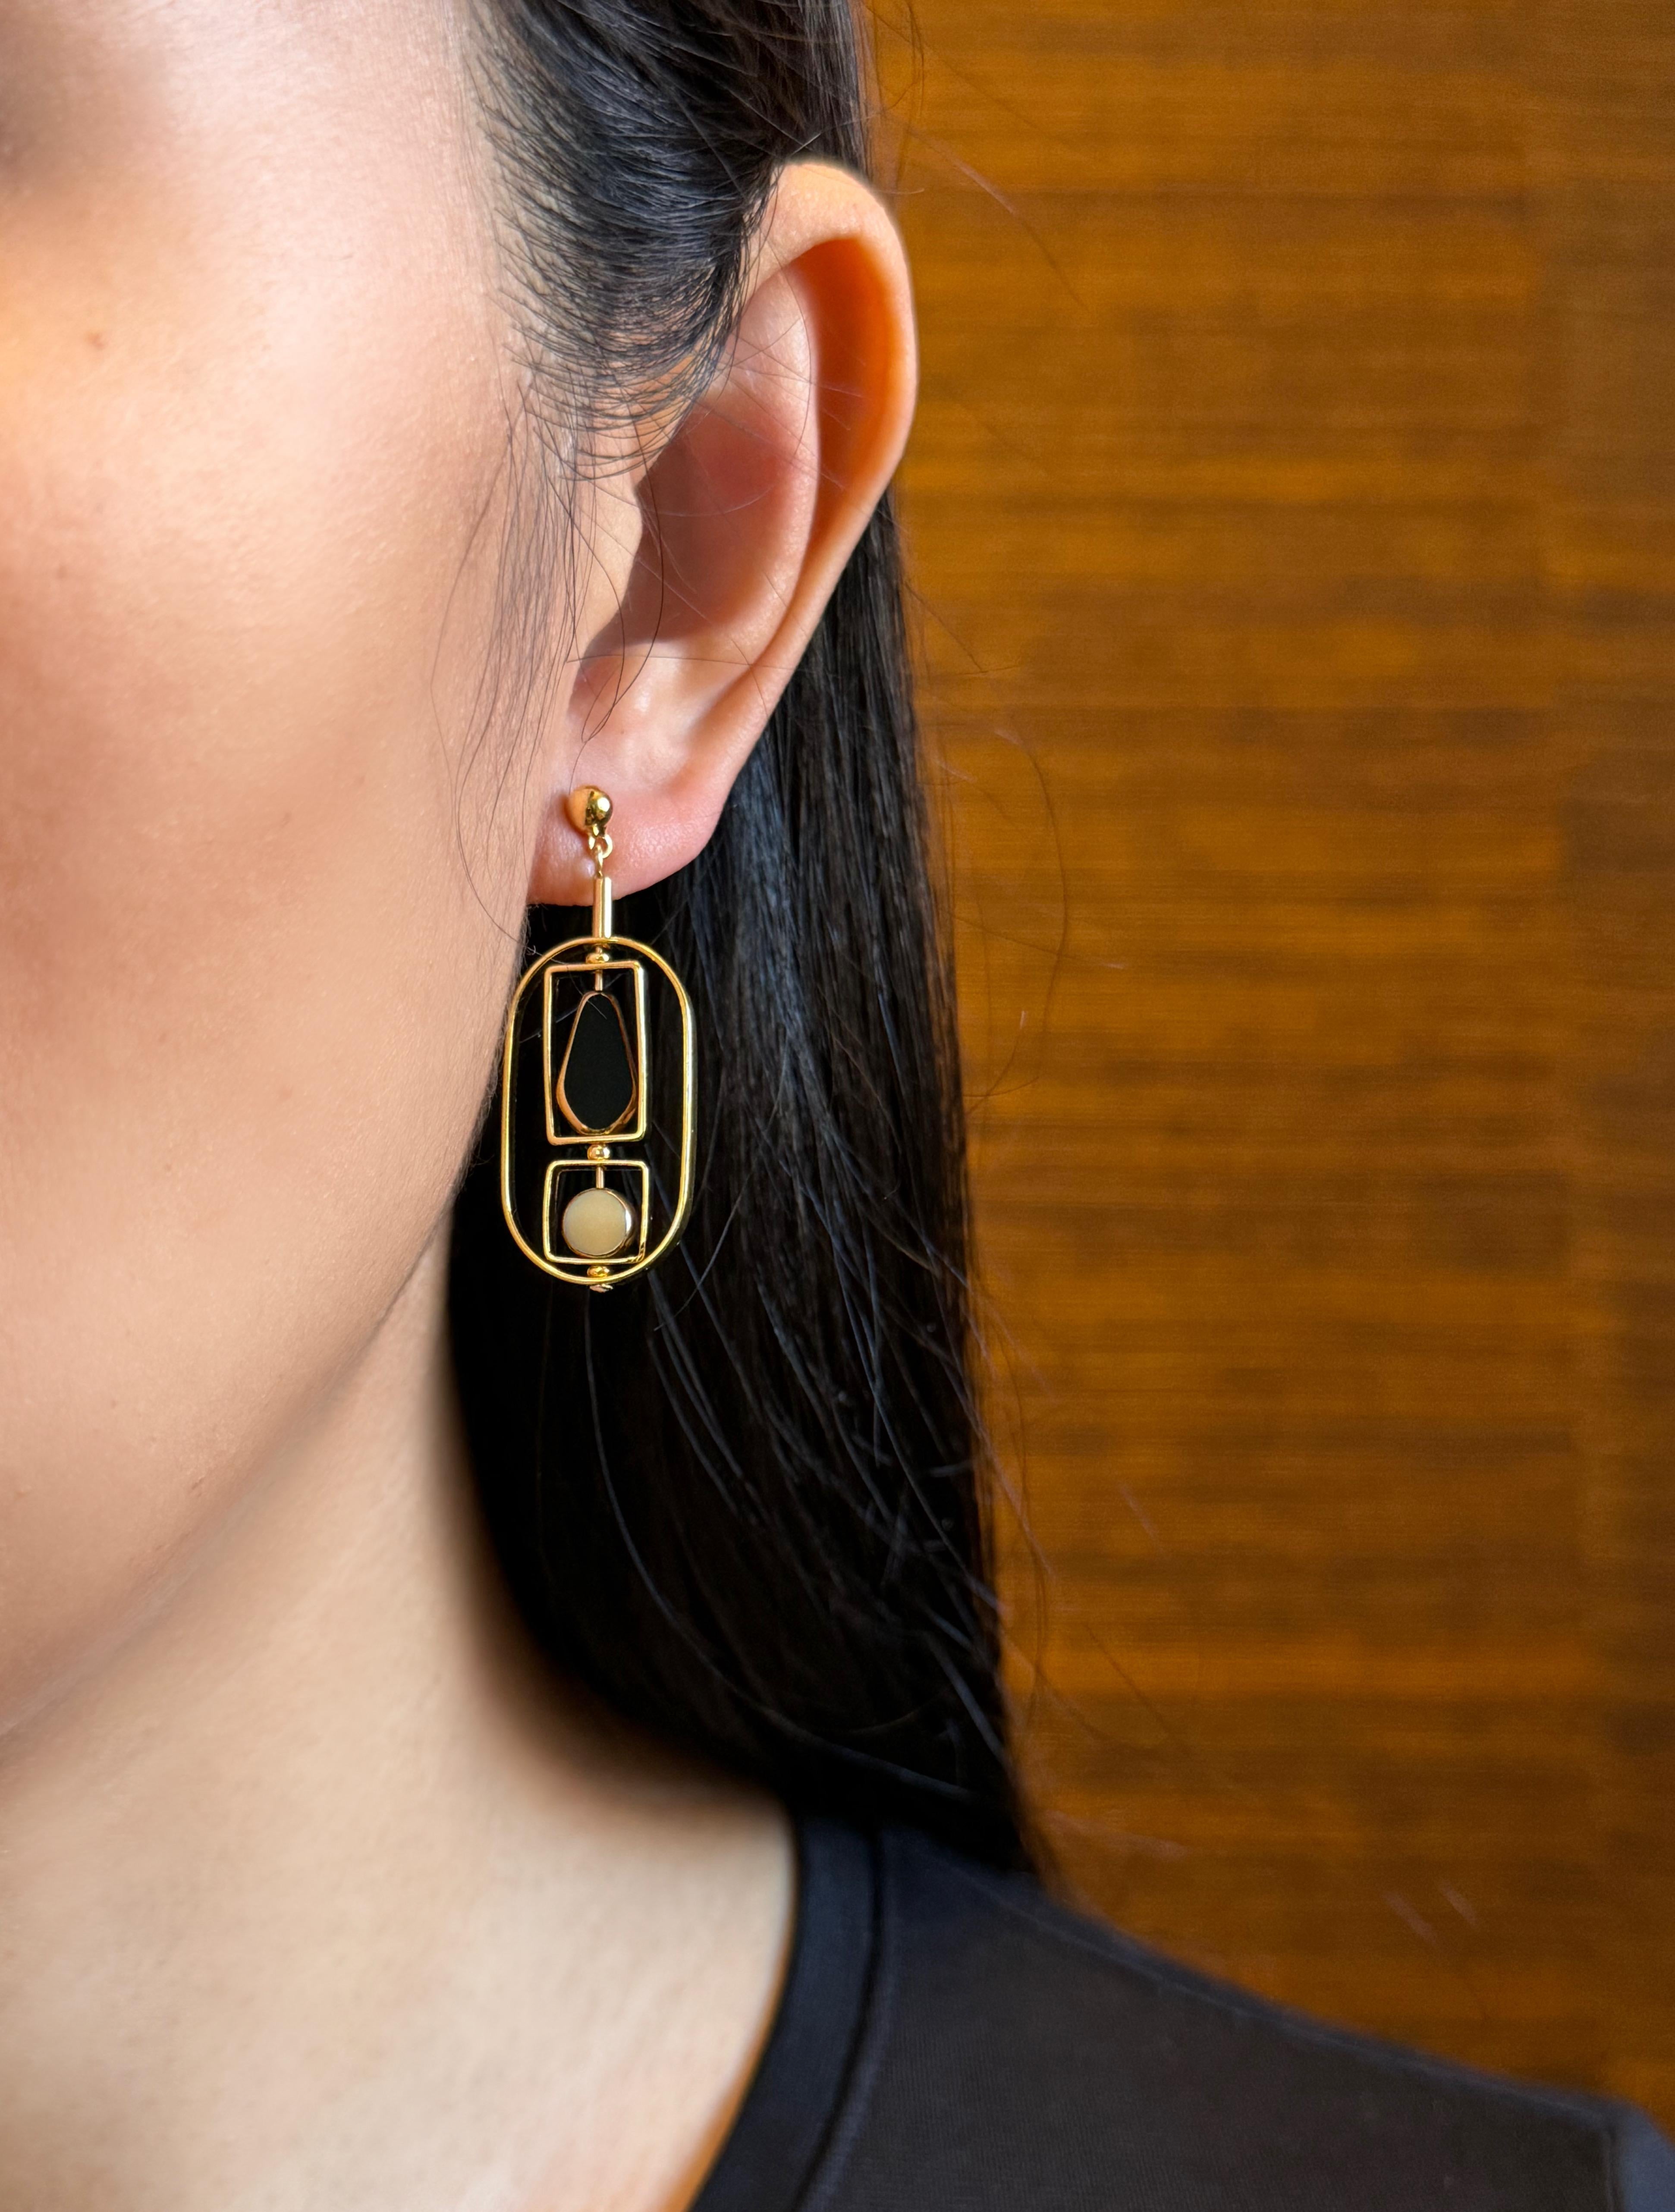 The earrings are lightweight and are made to rotate and reposition with movement. The earrings consist of small black kite and small beige circle-shaped beads. They are new old stock vintage German glass beads that are framed with 24K gold. The